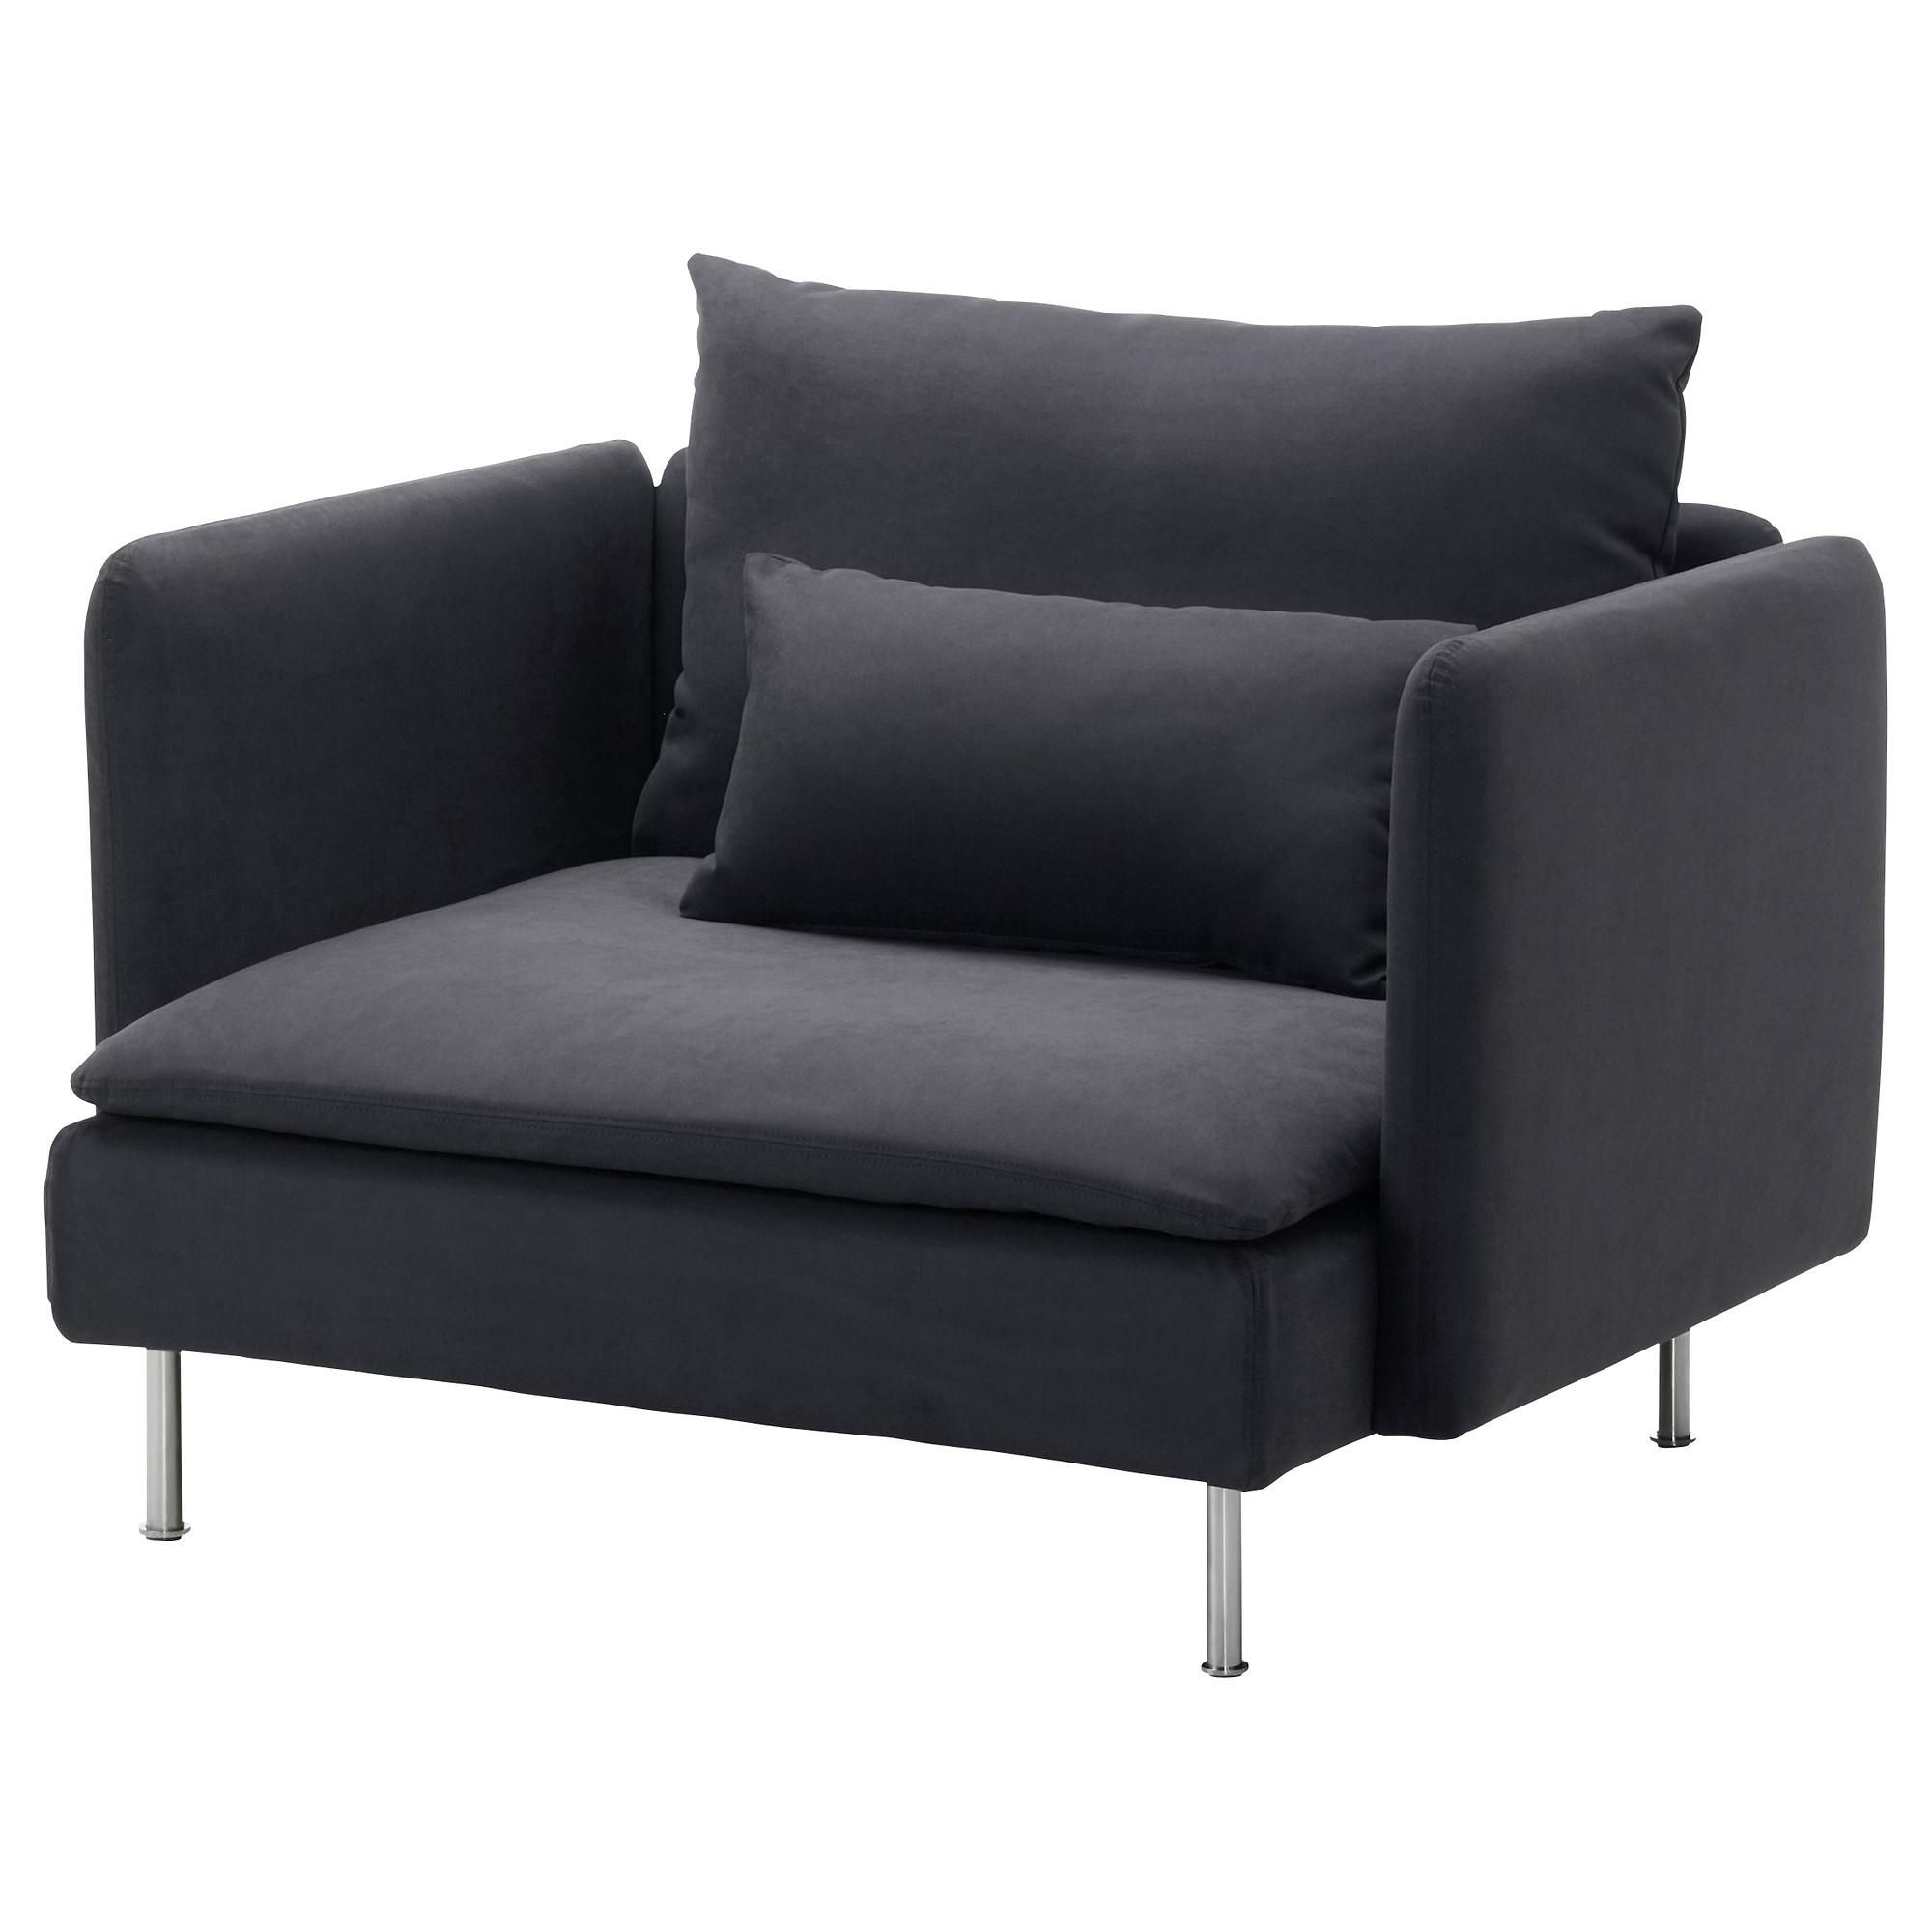 Sectional Sofas & Couches – Ikea Within Manstad Sofa Bed Ikea (View 20 of 20)